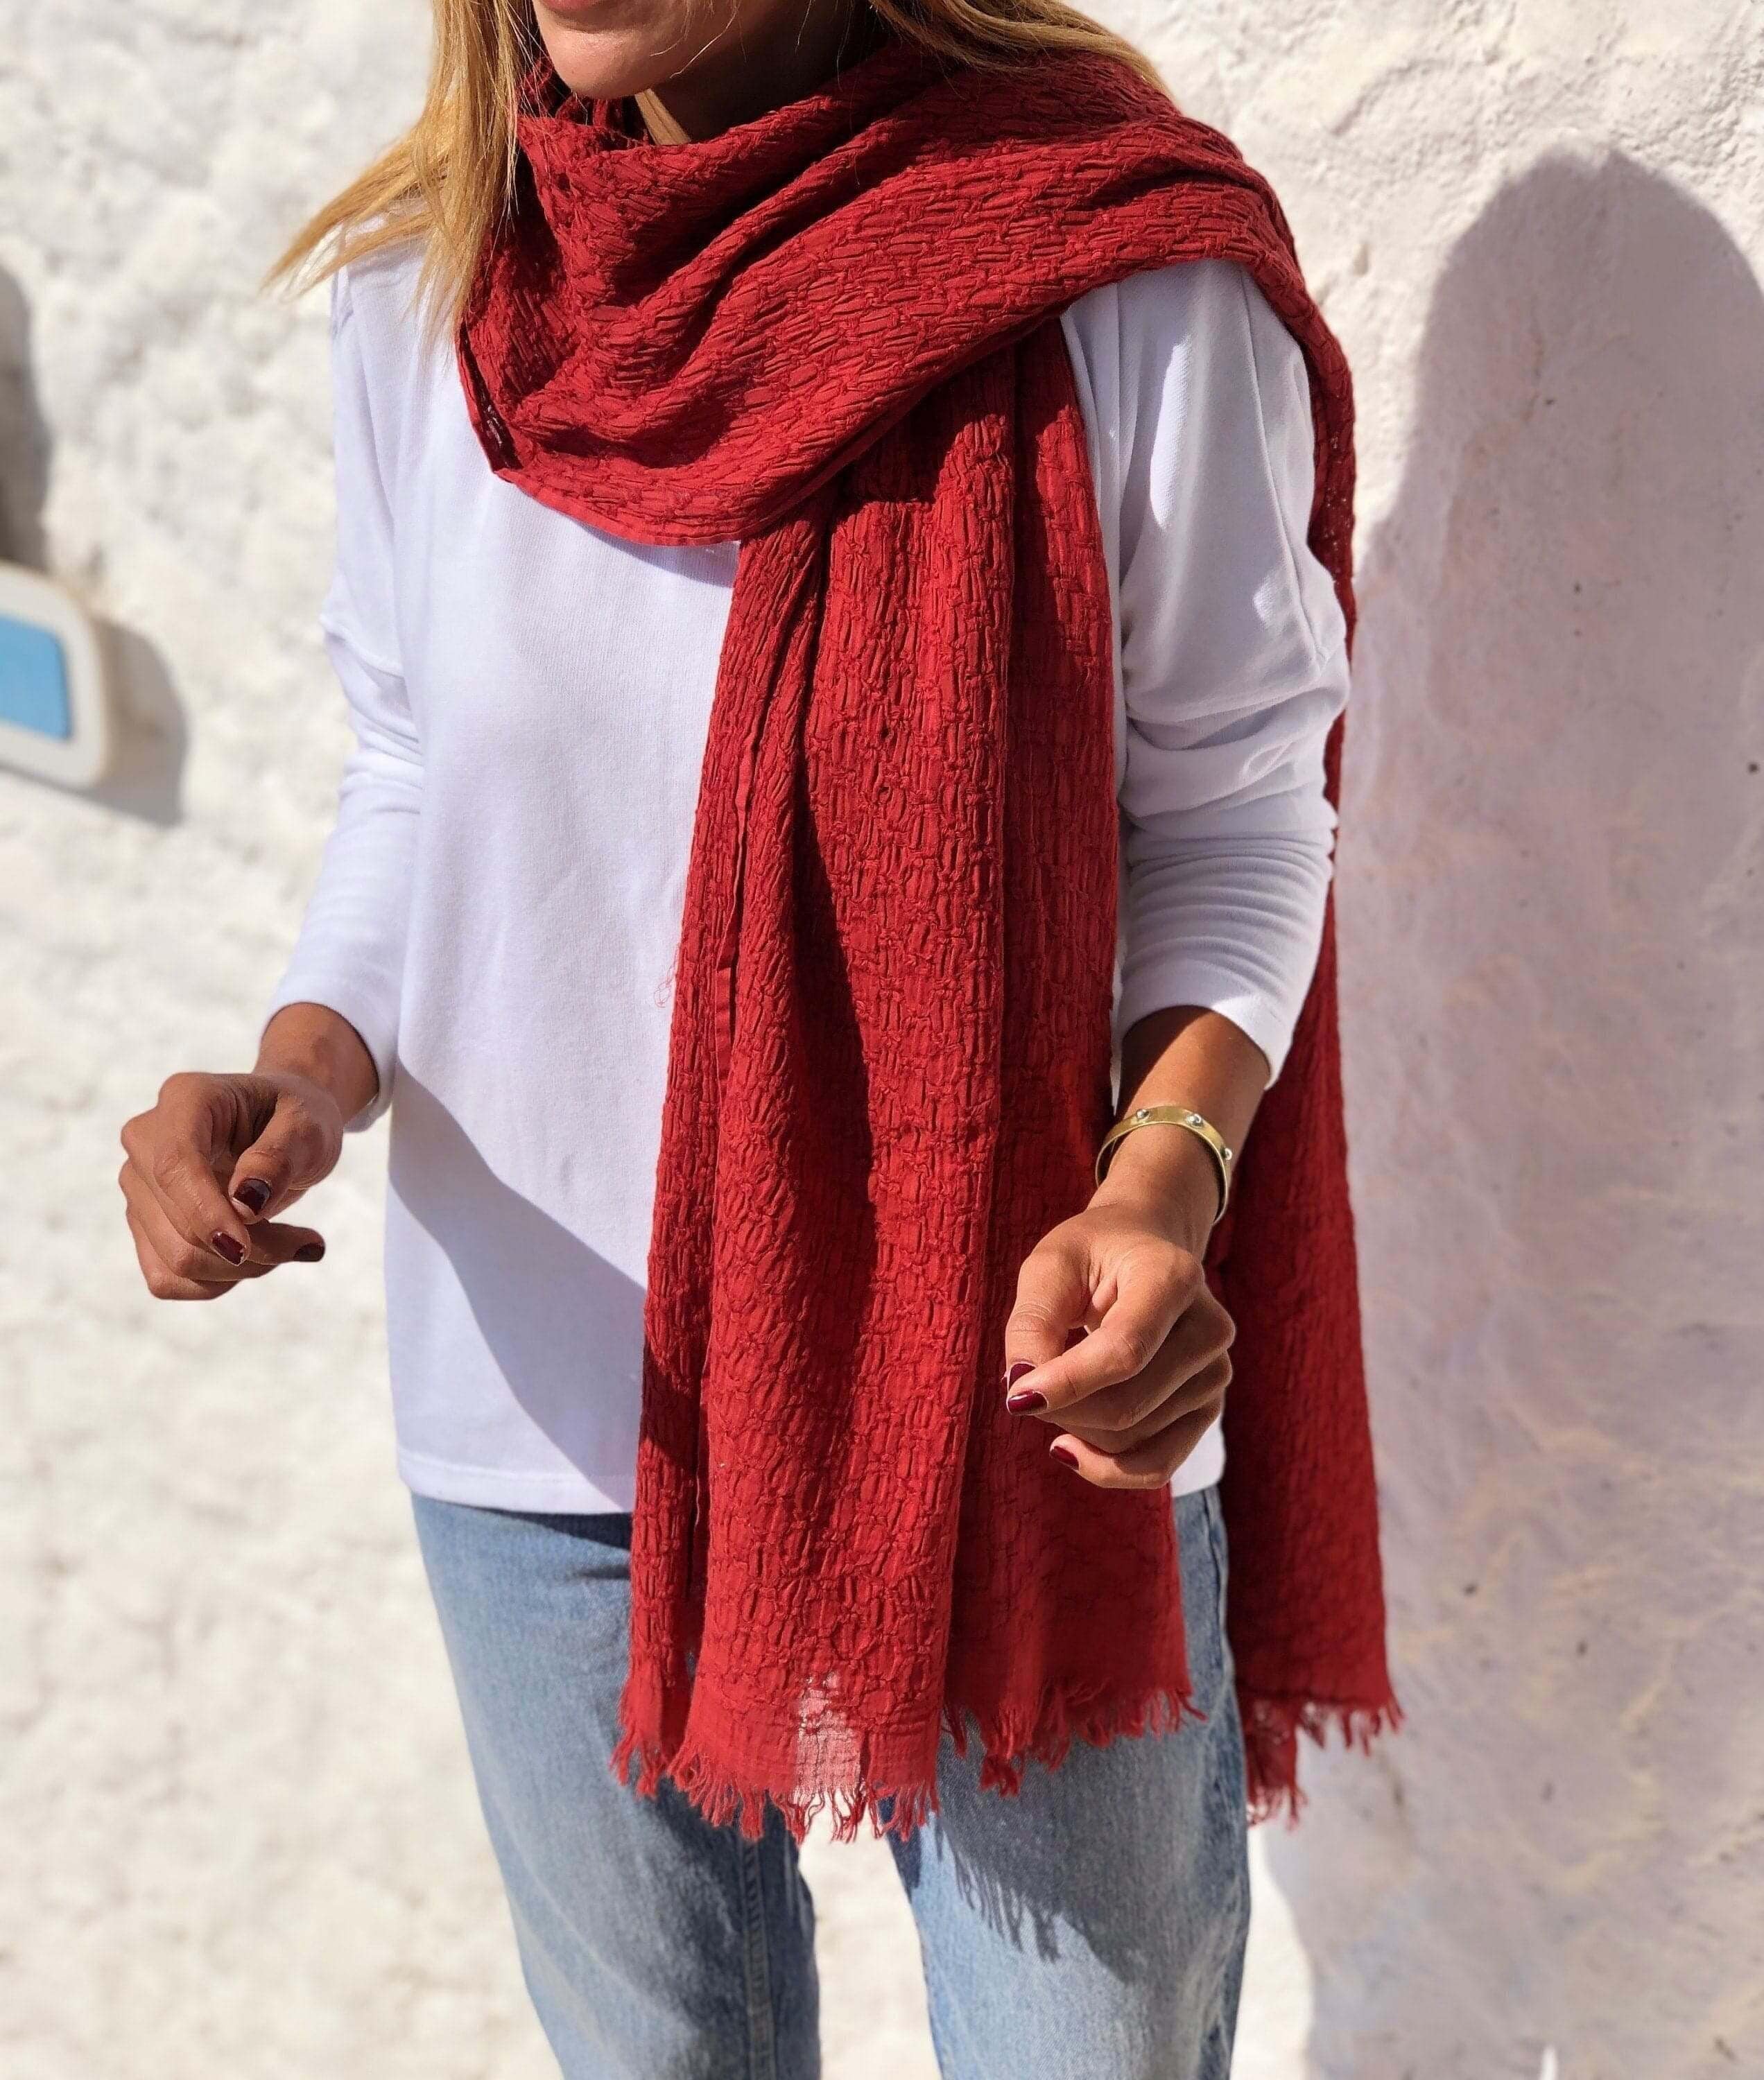 Show your love with this 100% organic cotton red large rectangle scarf, perfect as a Valentines Day gift. Soft, warm and versatile, this burgundy scarf is suitable for all seasons and will make any outfit stand out.